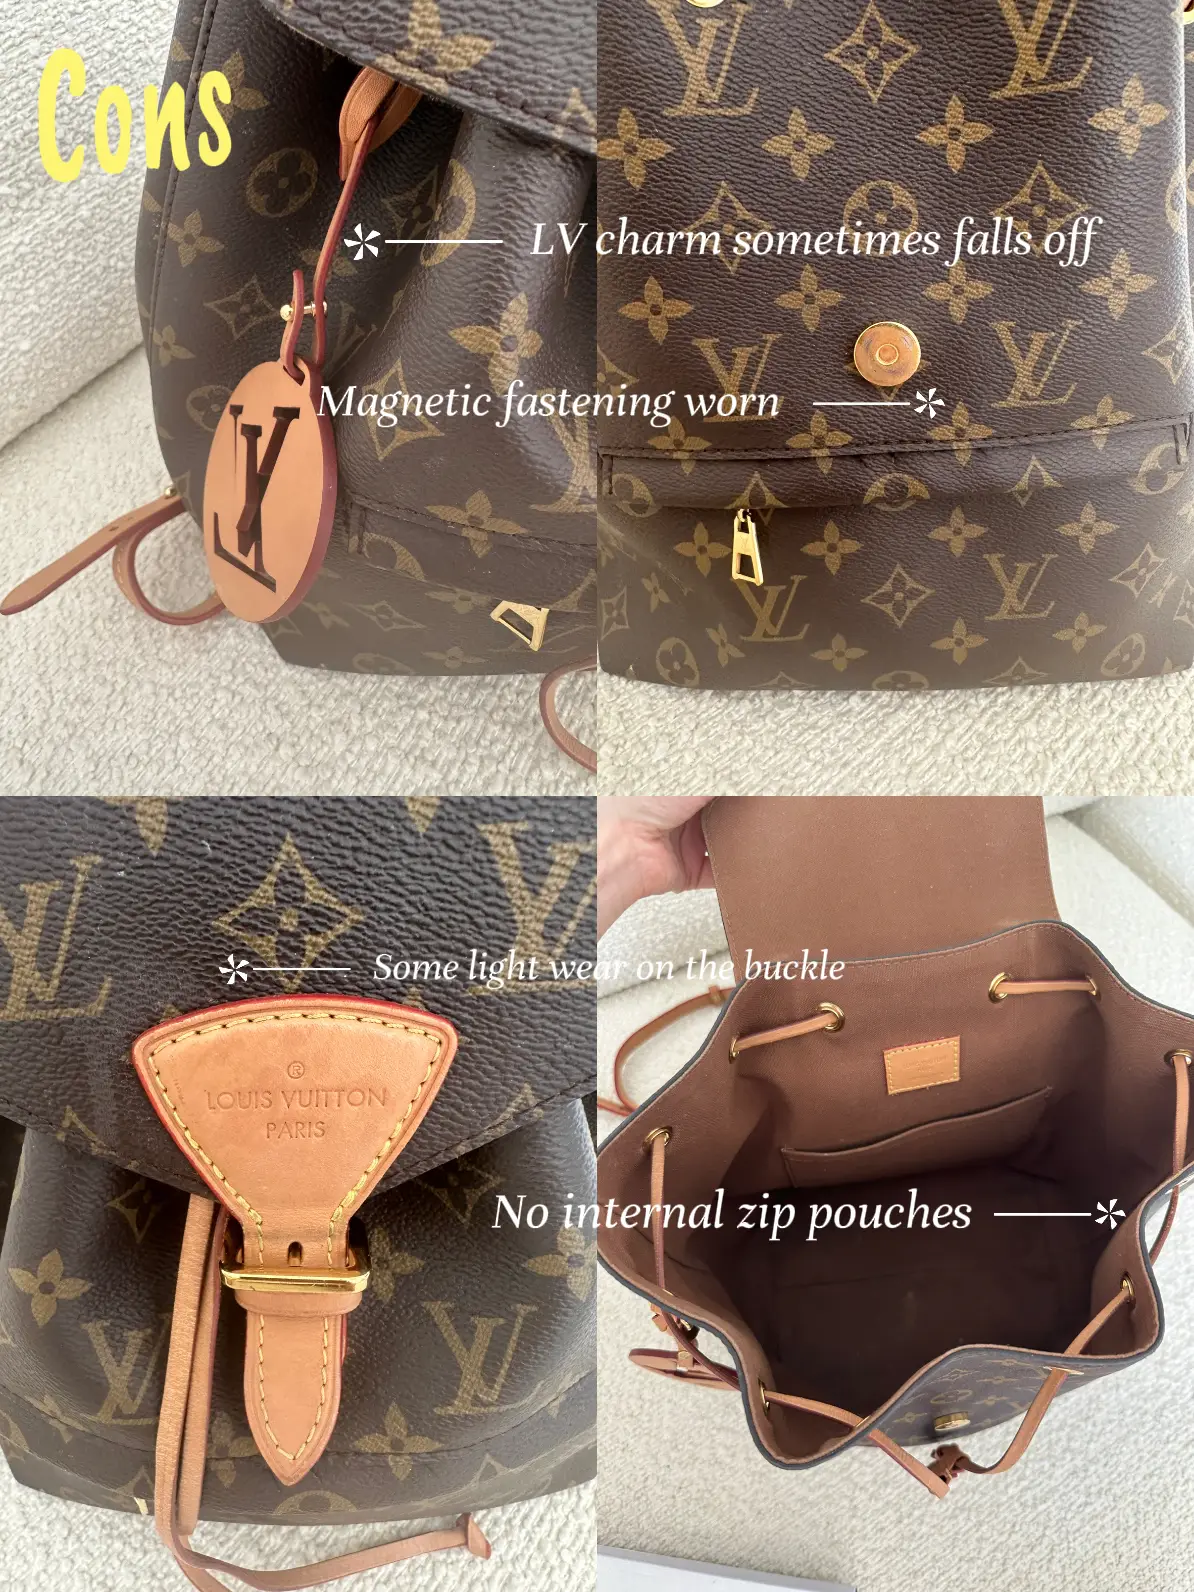 LOUIS VUITTON MONTSOURIS BACKPACK REVIEW, MOST USED BAG OF 2021! 